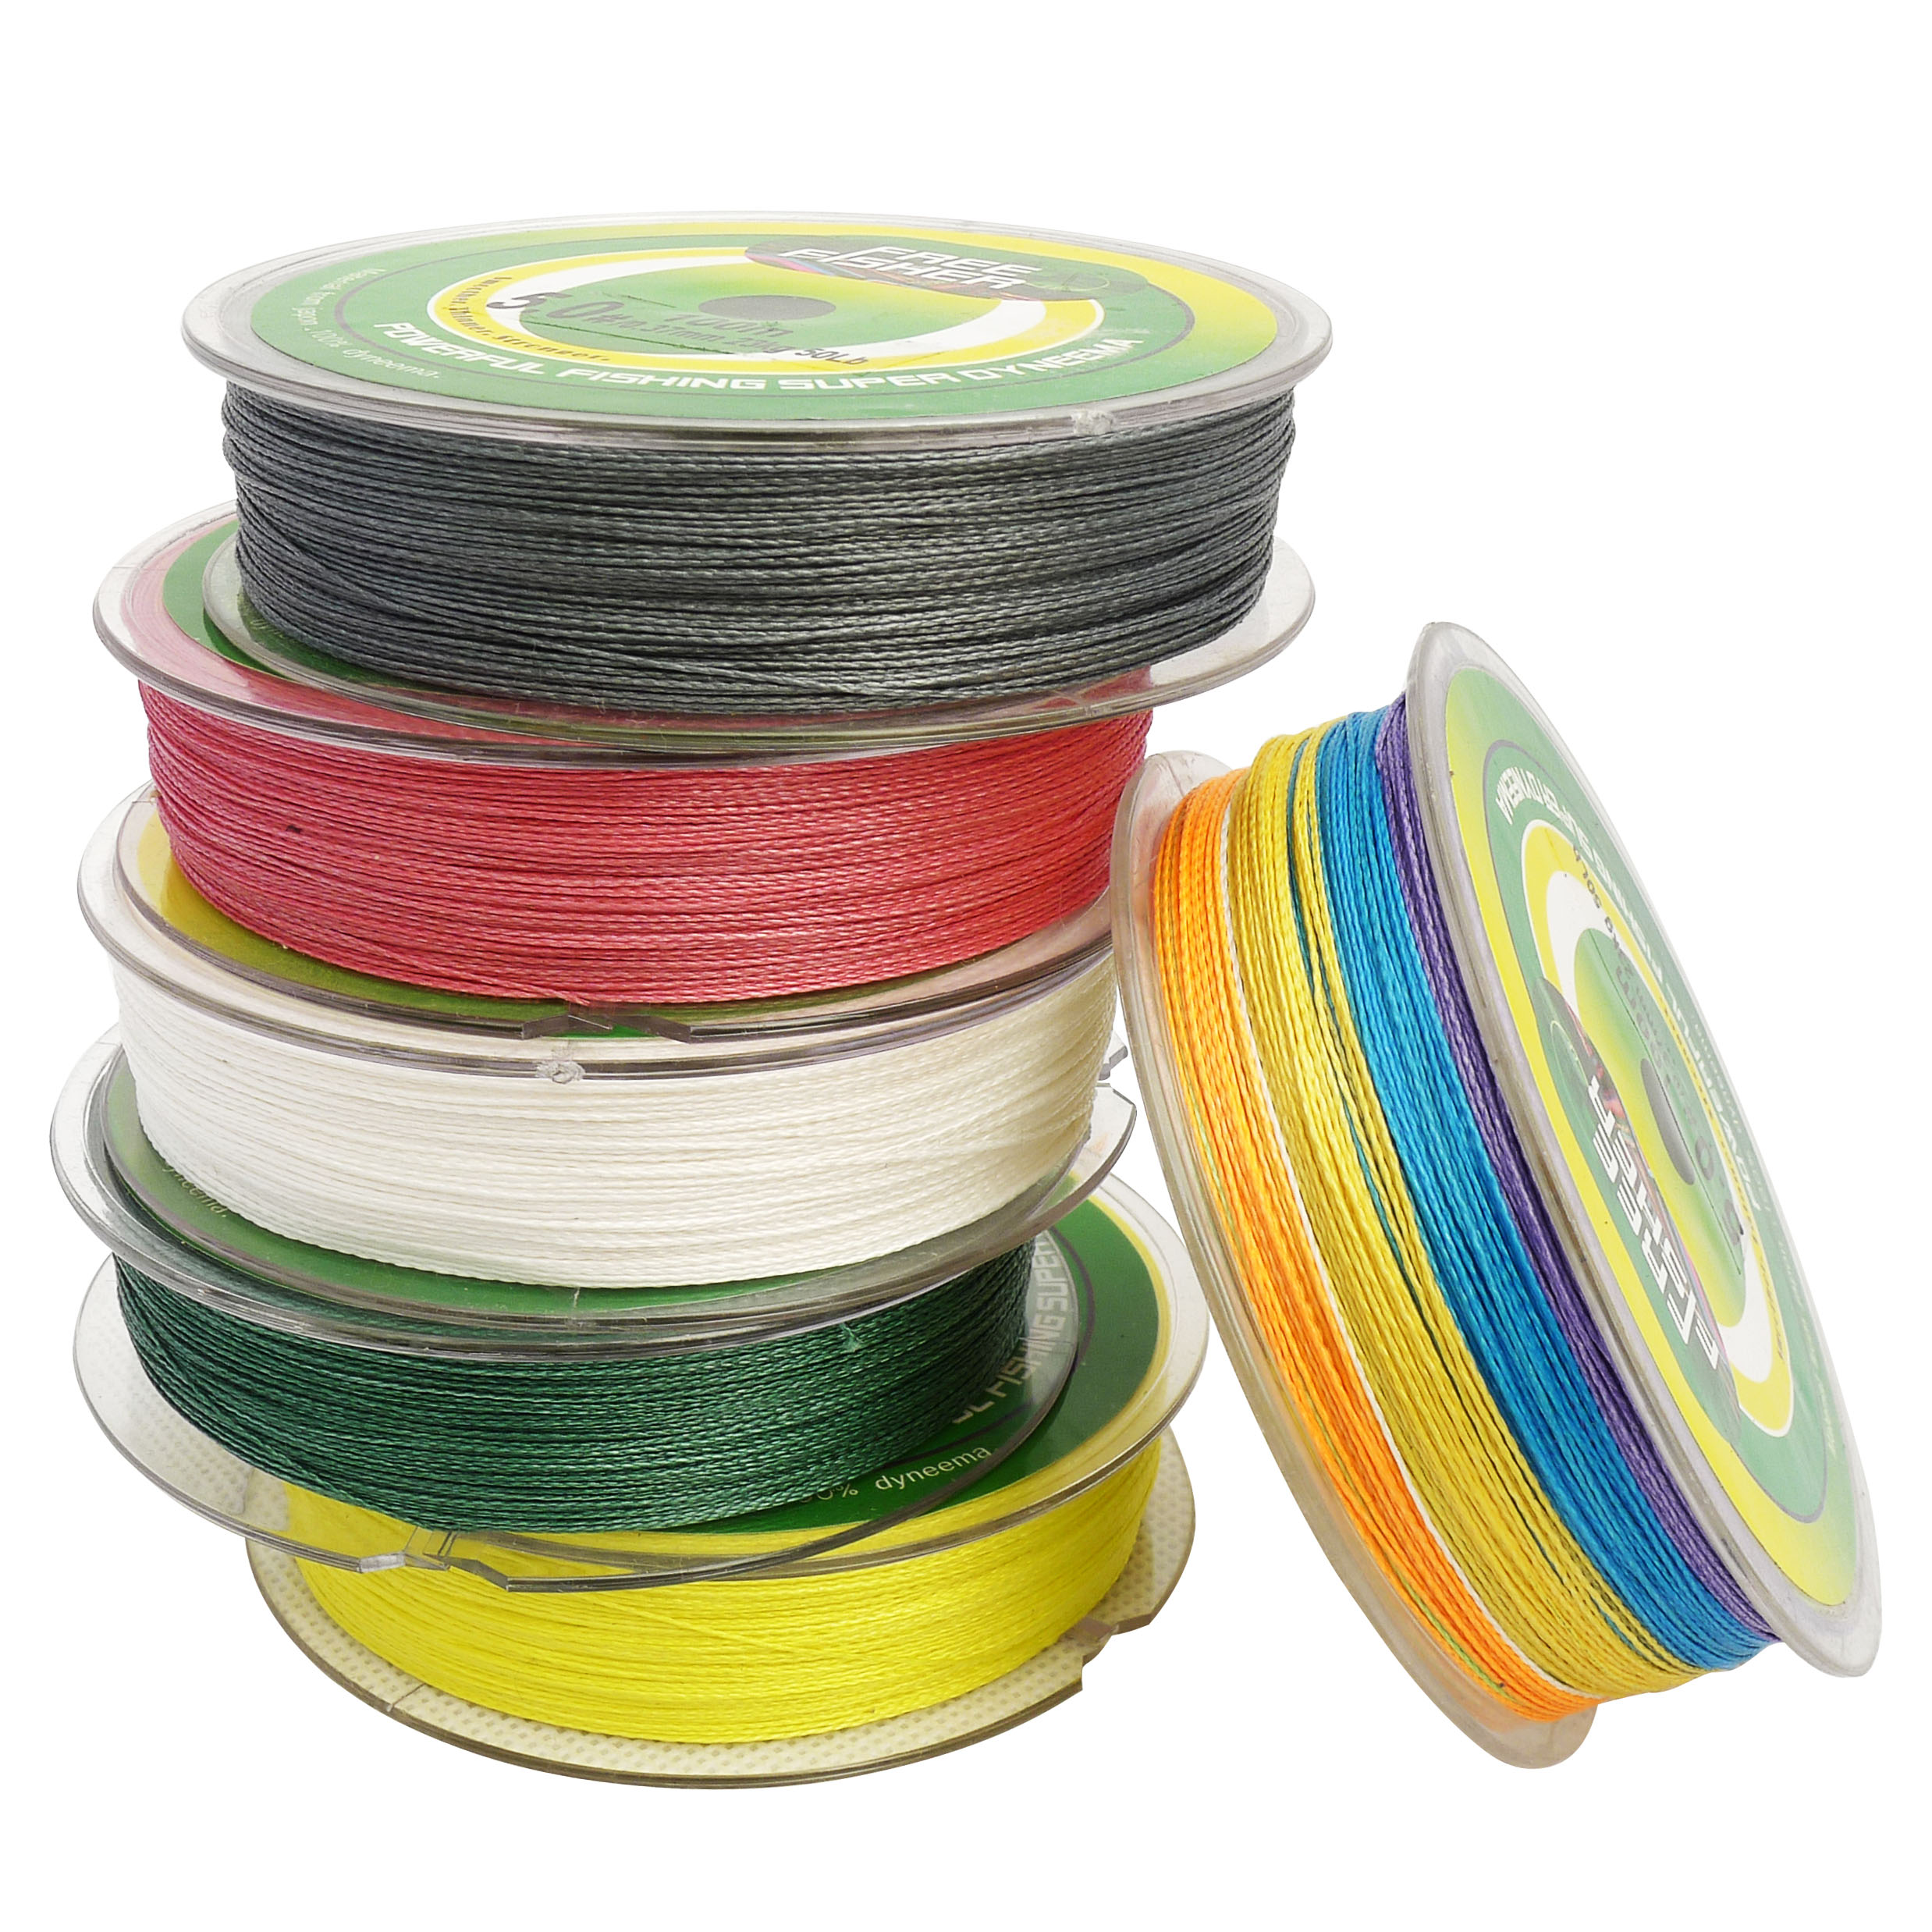 FREE FISHER Wholesale 10pcs Fishing Line 100m 4 Strands Braid line 100% PE Braided Line 8LB-80LB Multifilamentous Fishing Braieded Wire for Saltwater/Freshwater